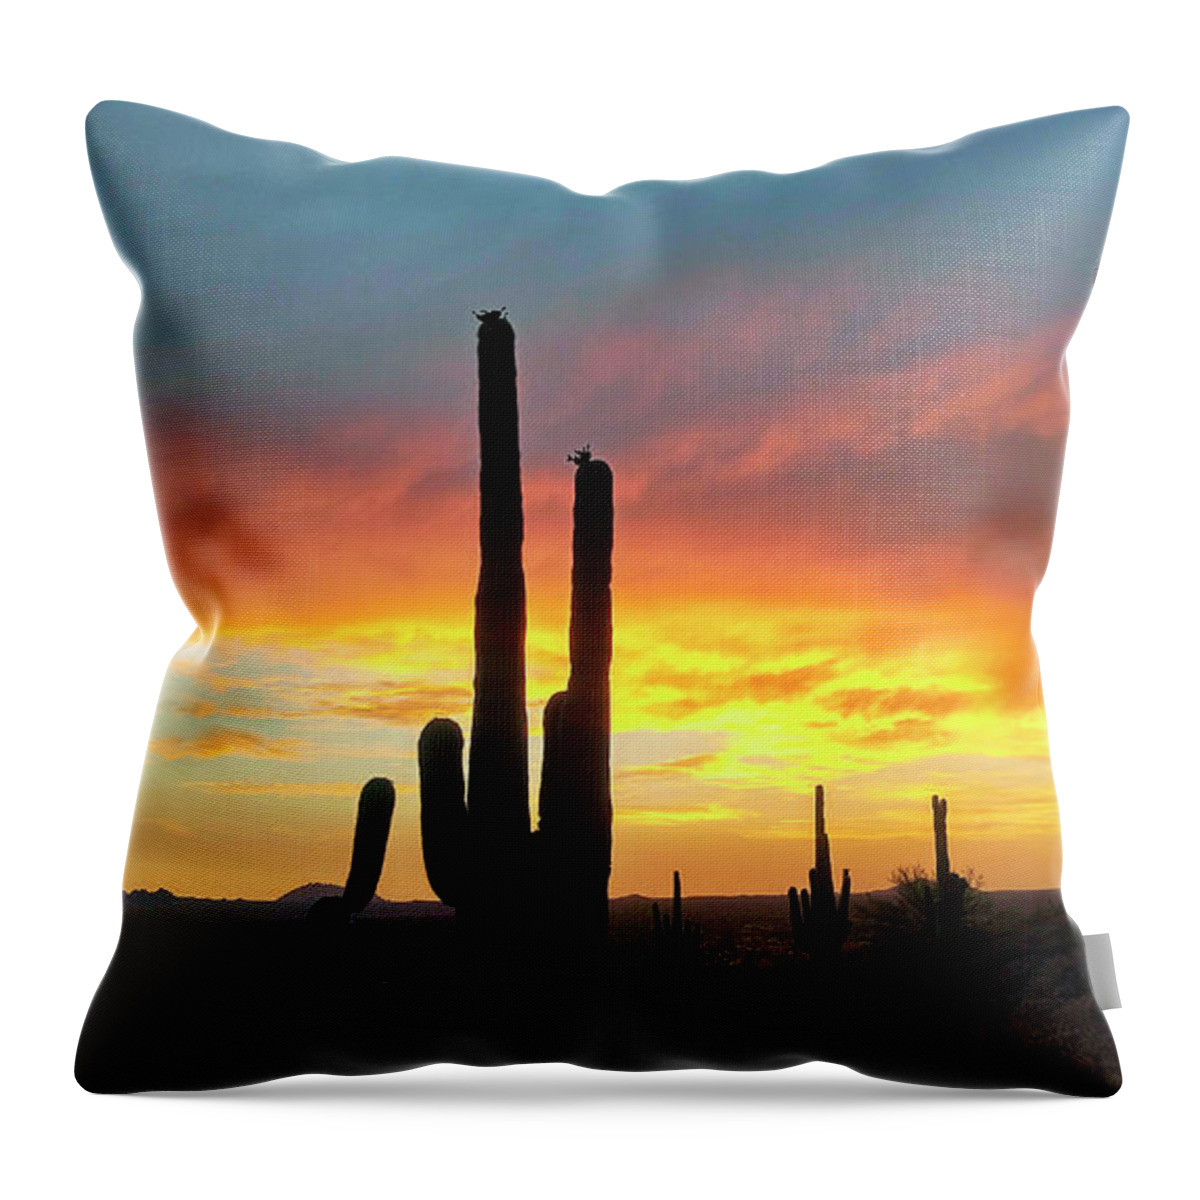 Anthony Citro Photography Throw Pillow featuring the photograph Saguaro Sunset by Anthony Citro